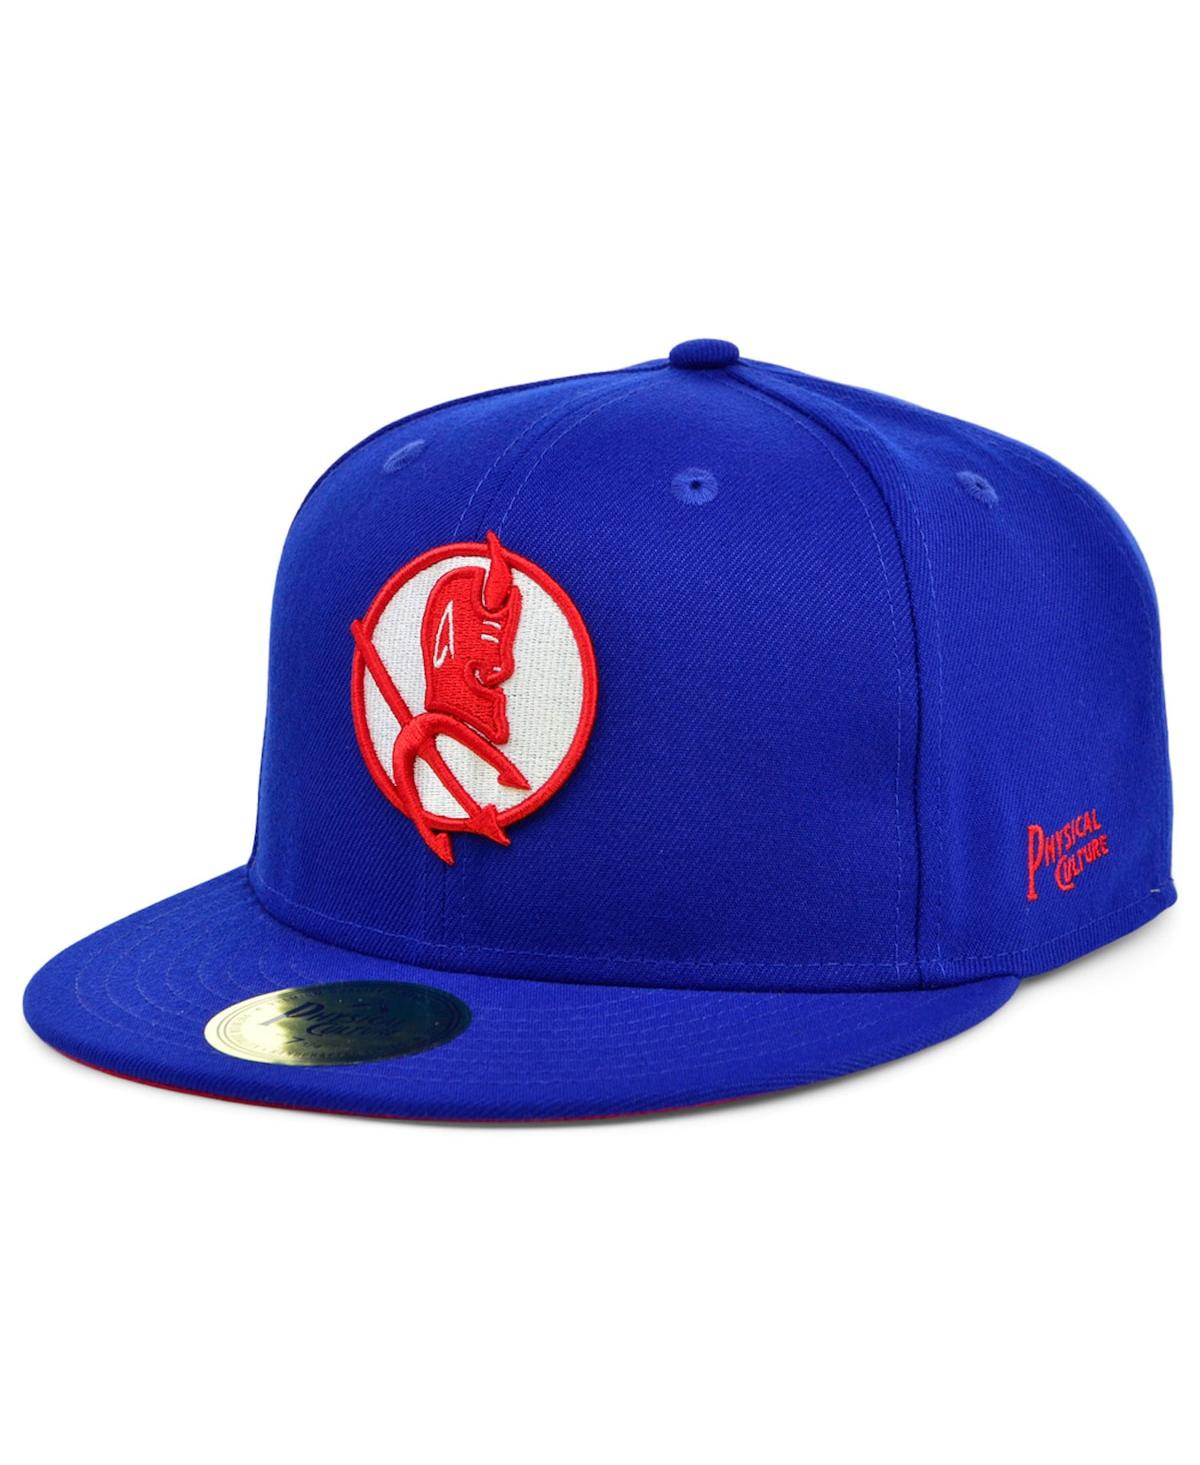 Men's Physical Culture Royal Los Angeles Red Devils Black Fives Fitted Hat - Royal